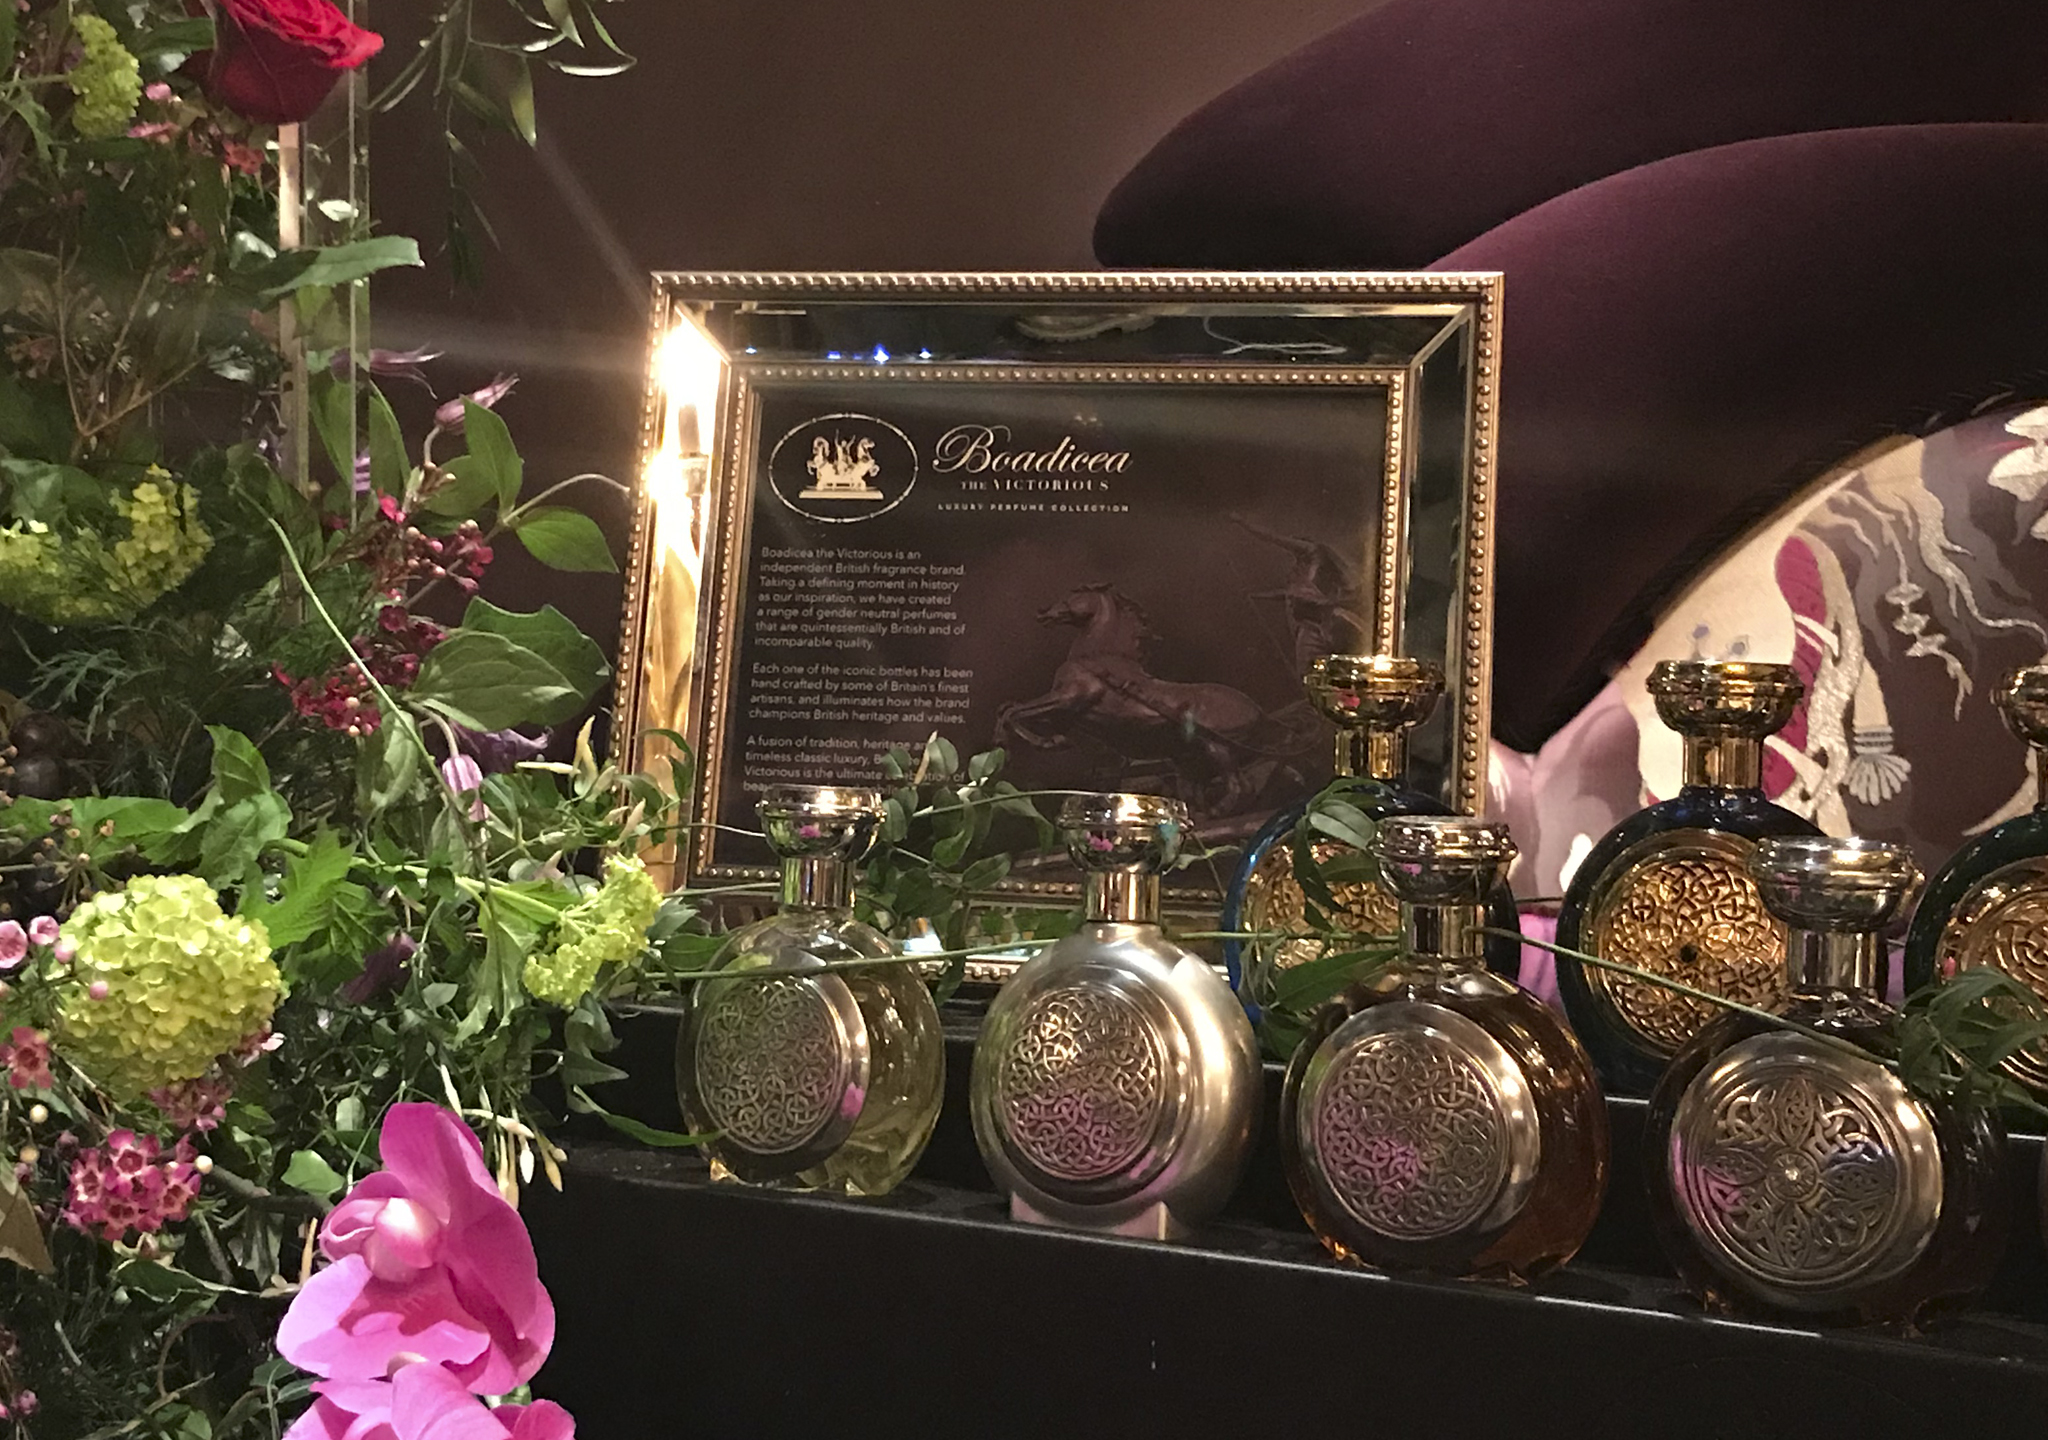 Boadicea Perfume attend Ghana Independence Dinner at the exclusive Mayfair venue of Park Chinois